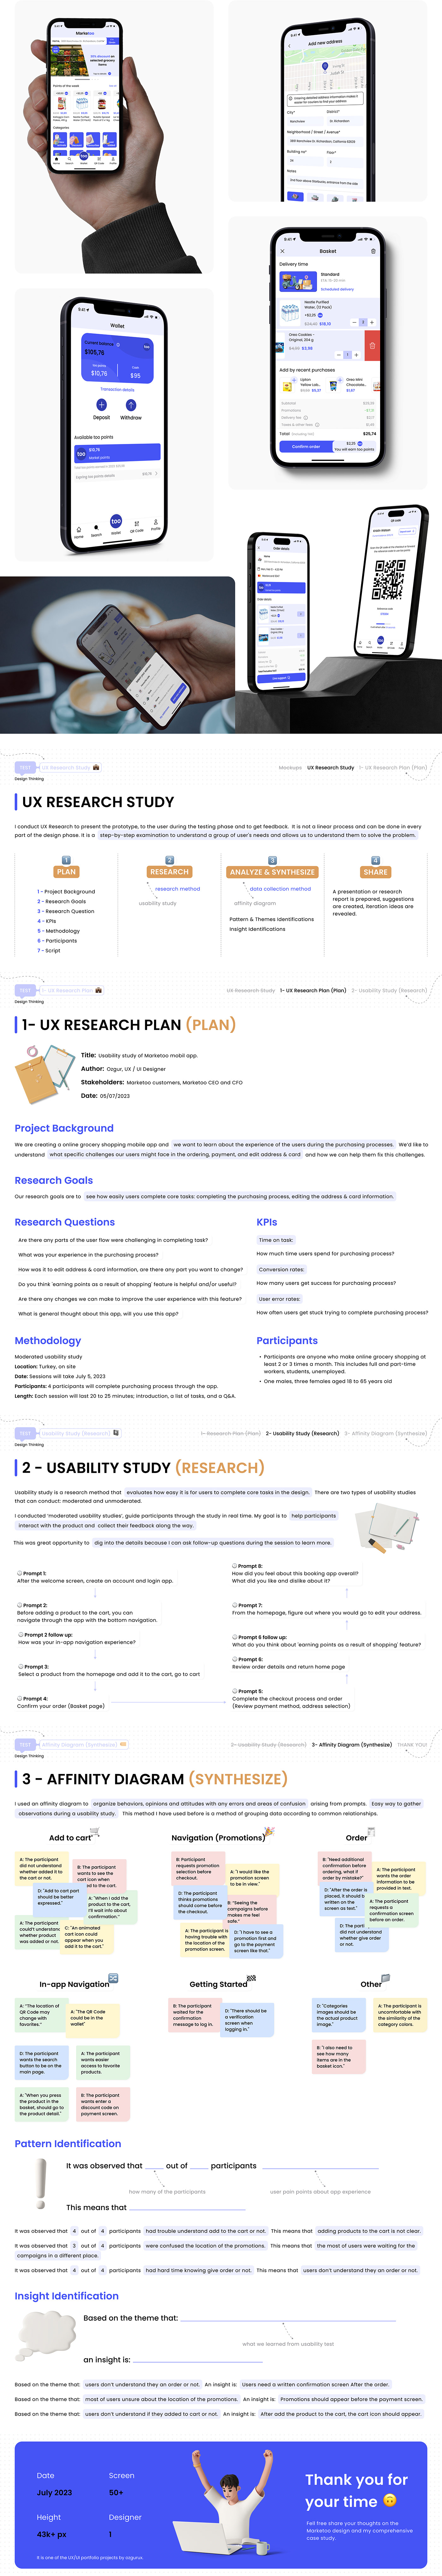 Case Study Mobile app design thinking UX UI DESign UX Research user interface user experience UX Case Study UX design app design